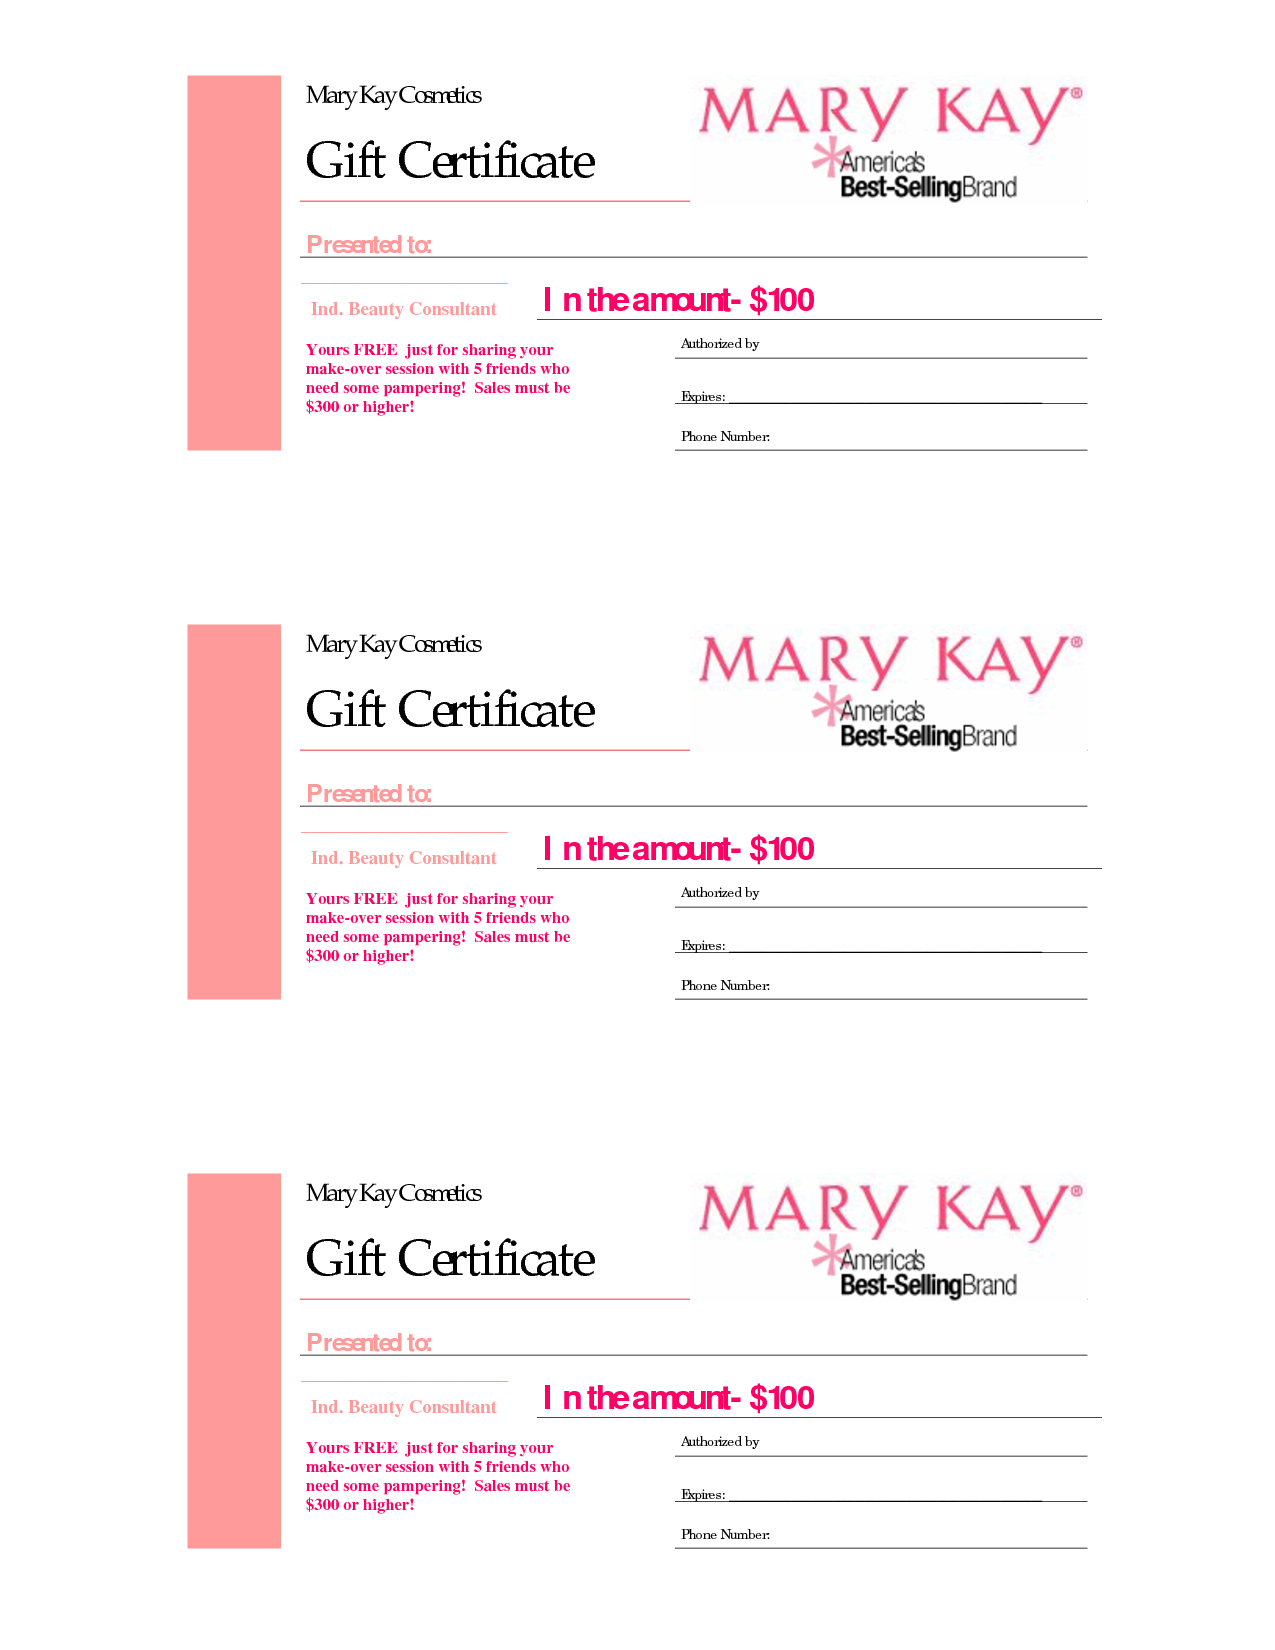 Gift Certificates | Mary Kay Gift Certificate! | Mary Kay Throughout Mary Kay Gift Certificate Template